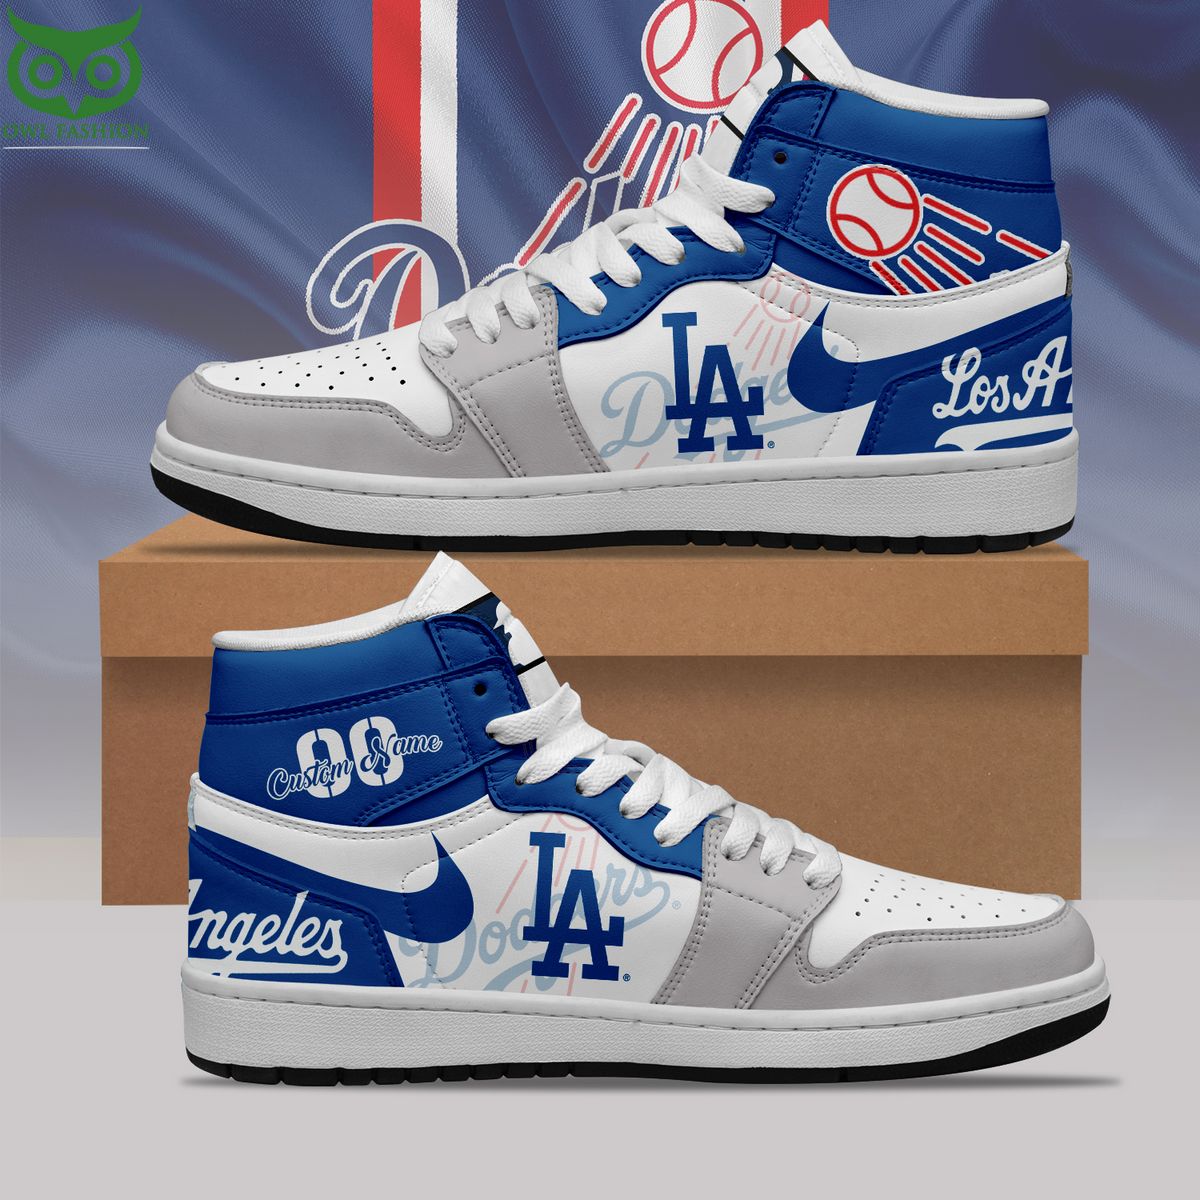 MLS Seattle Sounders FC Shoes Air Jordan 1 Customized Limited High Top -  Owl Fashion Shop